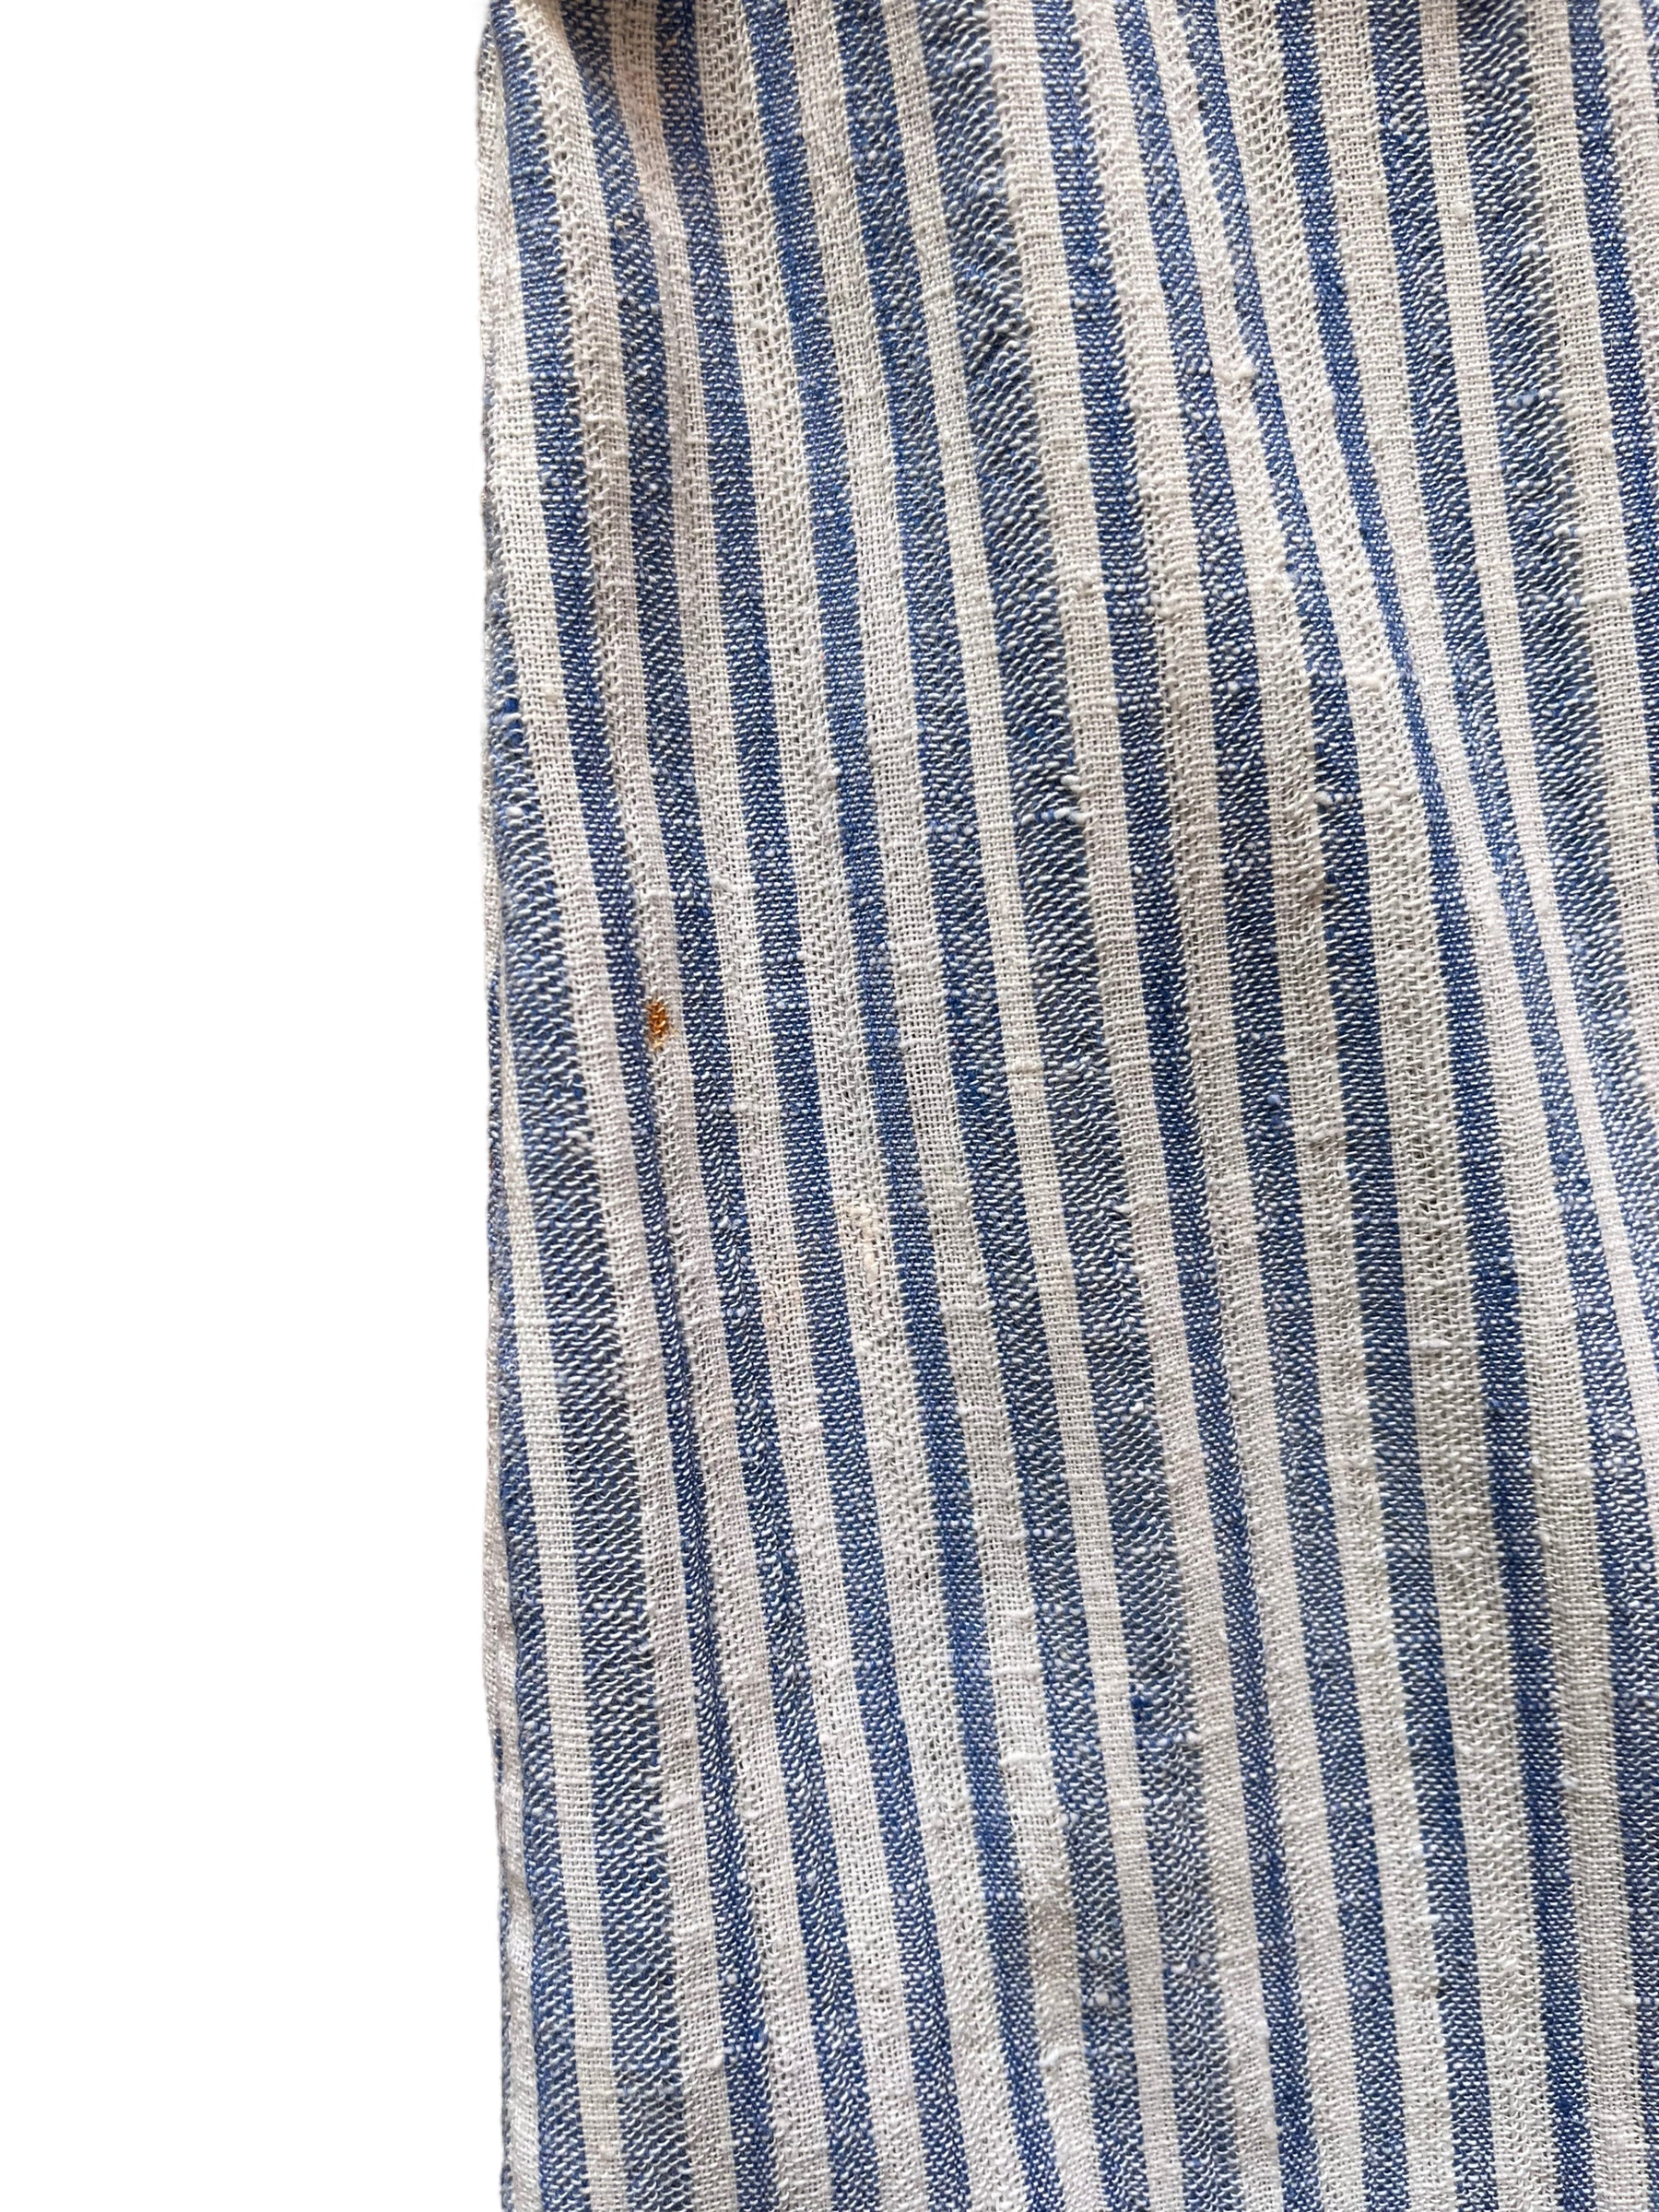 Small spot along the back left on Vintage 1970s Striped Kaftan by Beach Things